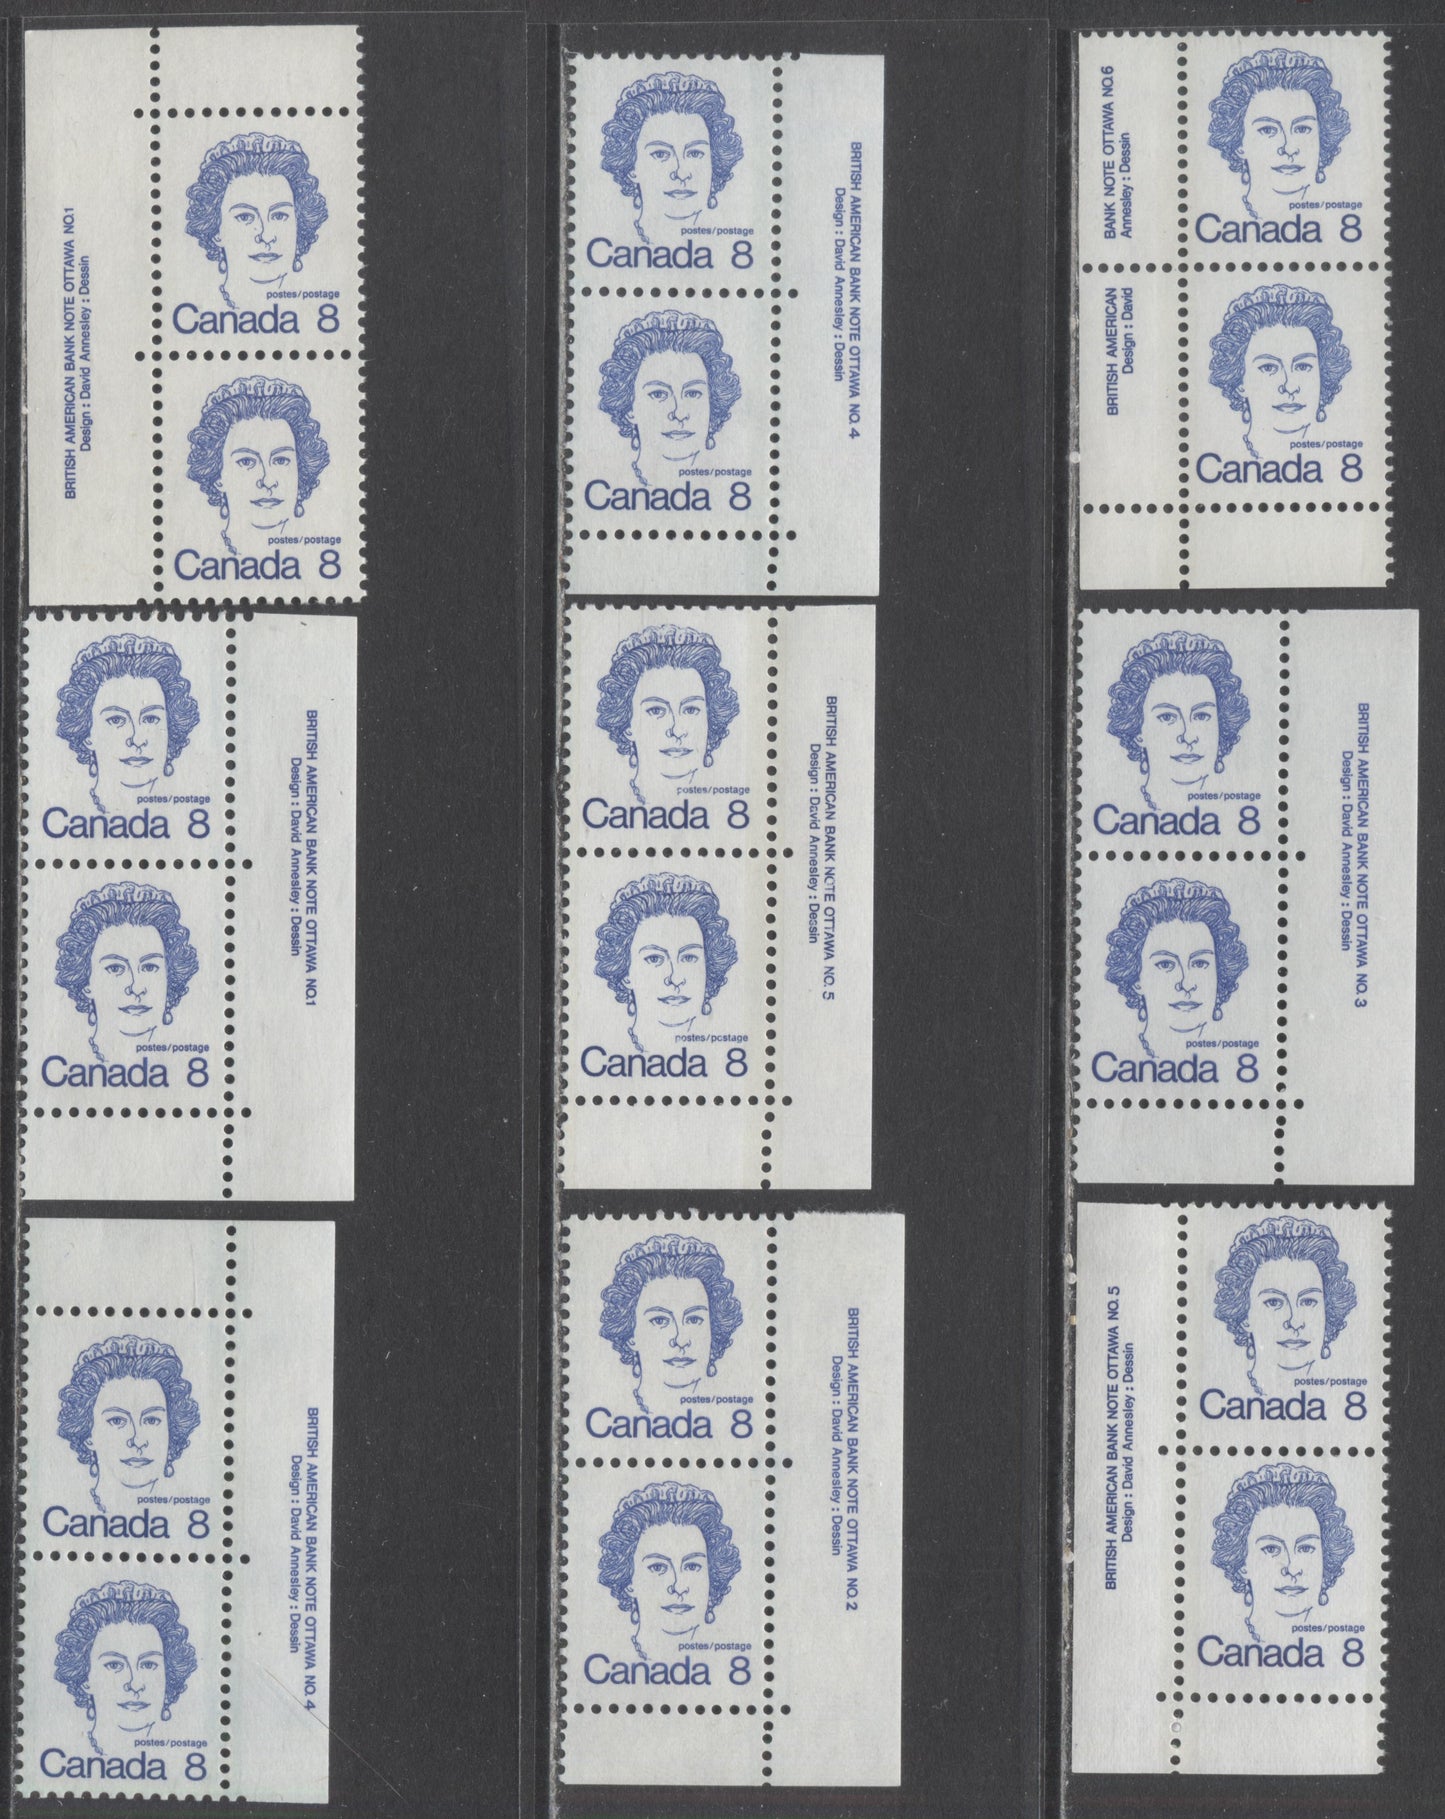 Lot 322 Canada #593-593i,593iii-593ix,593b 8c Royal Blue Queen Elizabeth II, 1973 - 1976 Caricature Issue, 9 VFNH Plate Pairs Showing Different Plates And Papers Including Unlisted